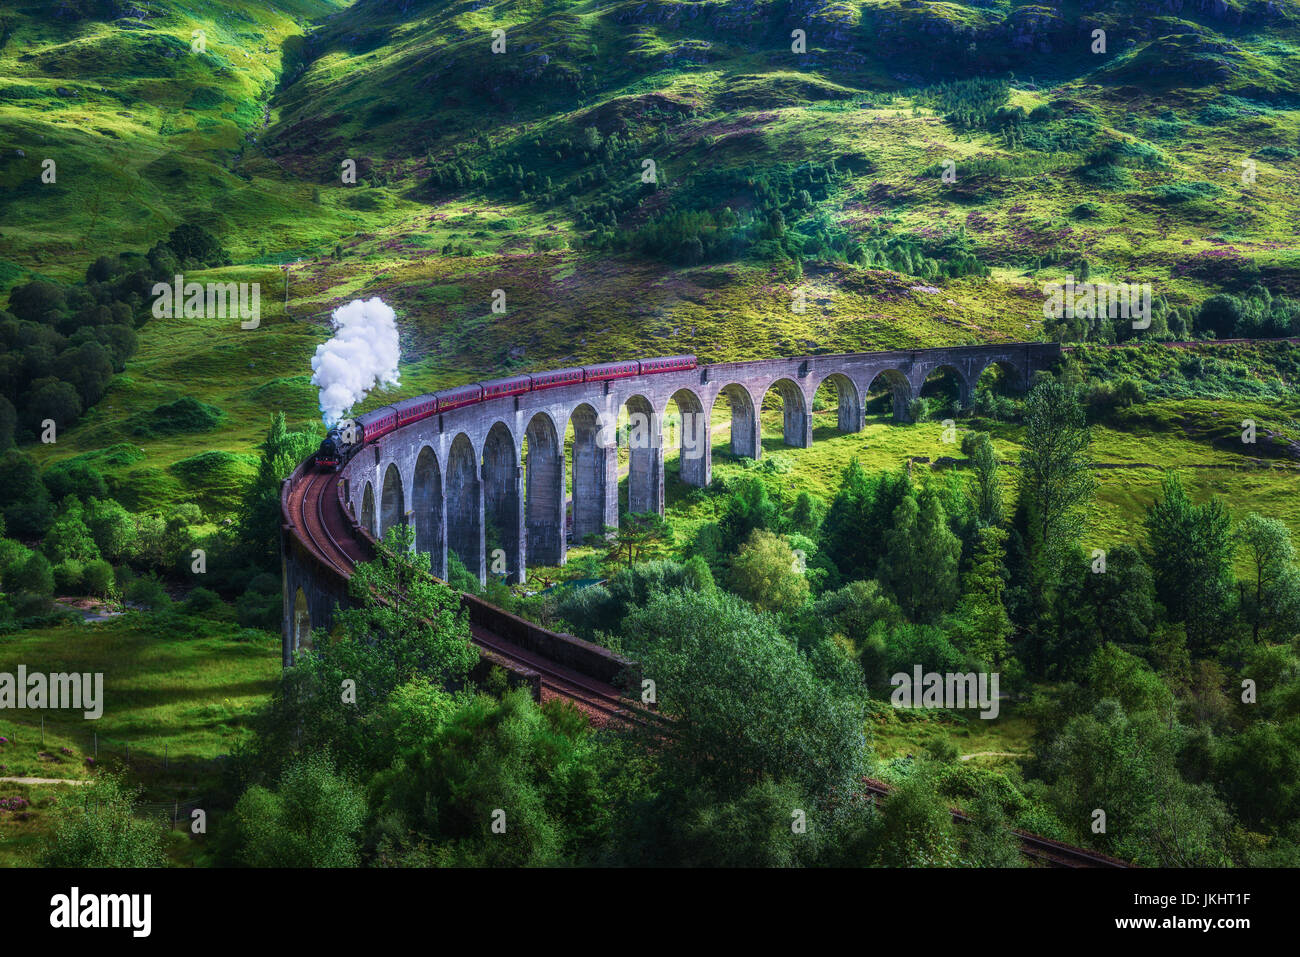 Glenfinnan Railway Viaduct in Scotland with the Jacobite steam train passing over. Artistic vintage style processing. Stock Photo